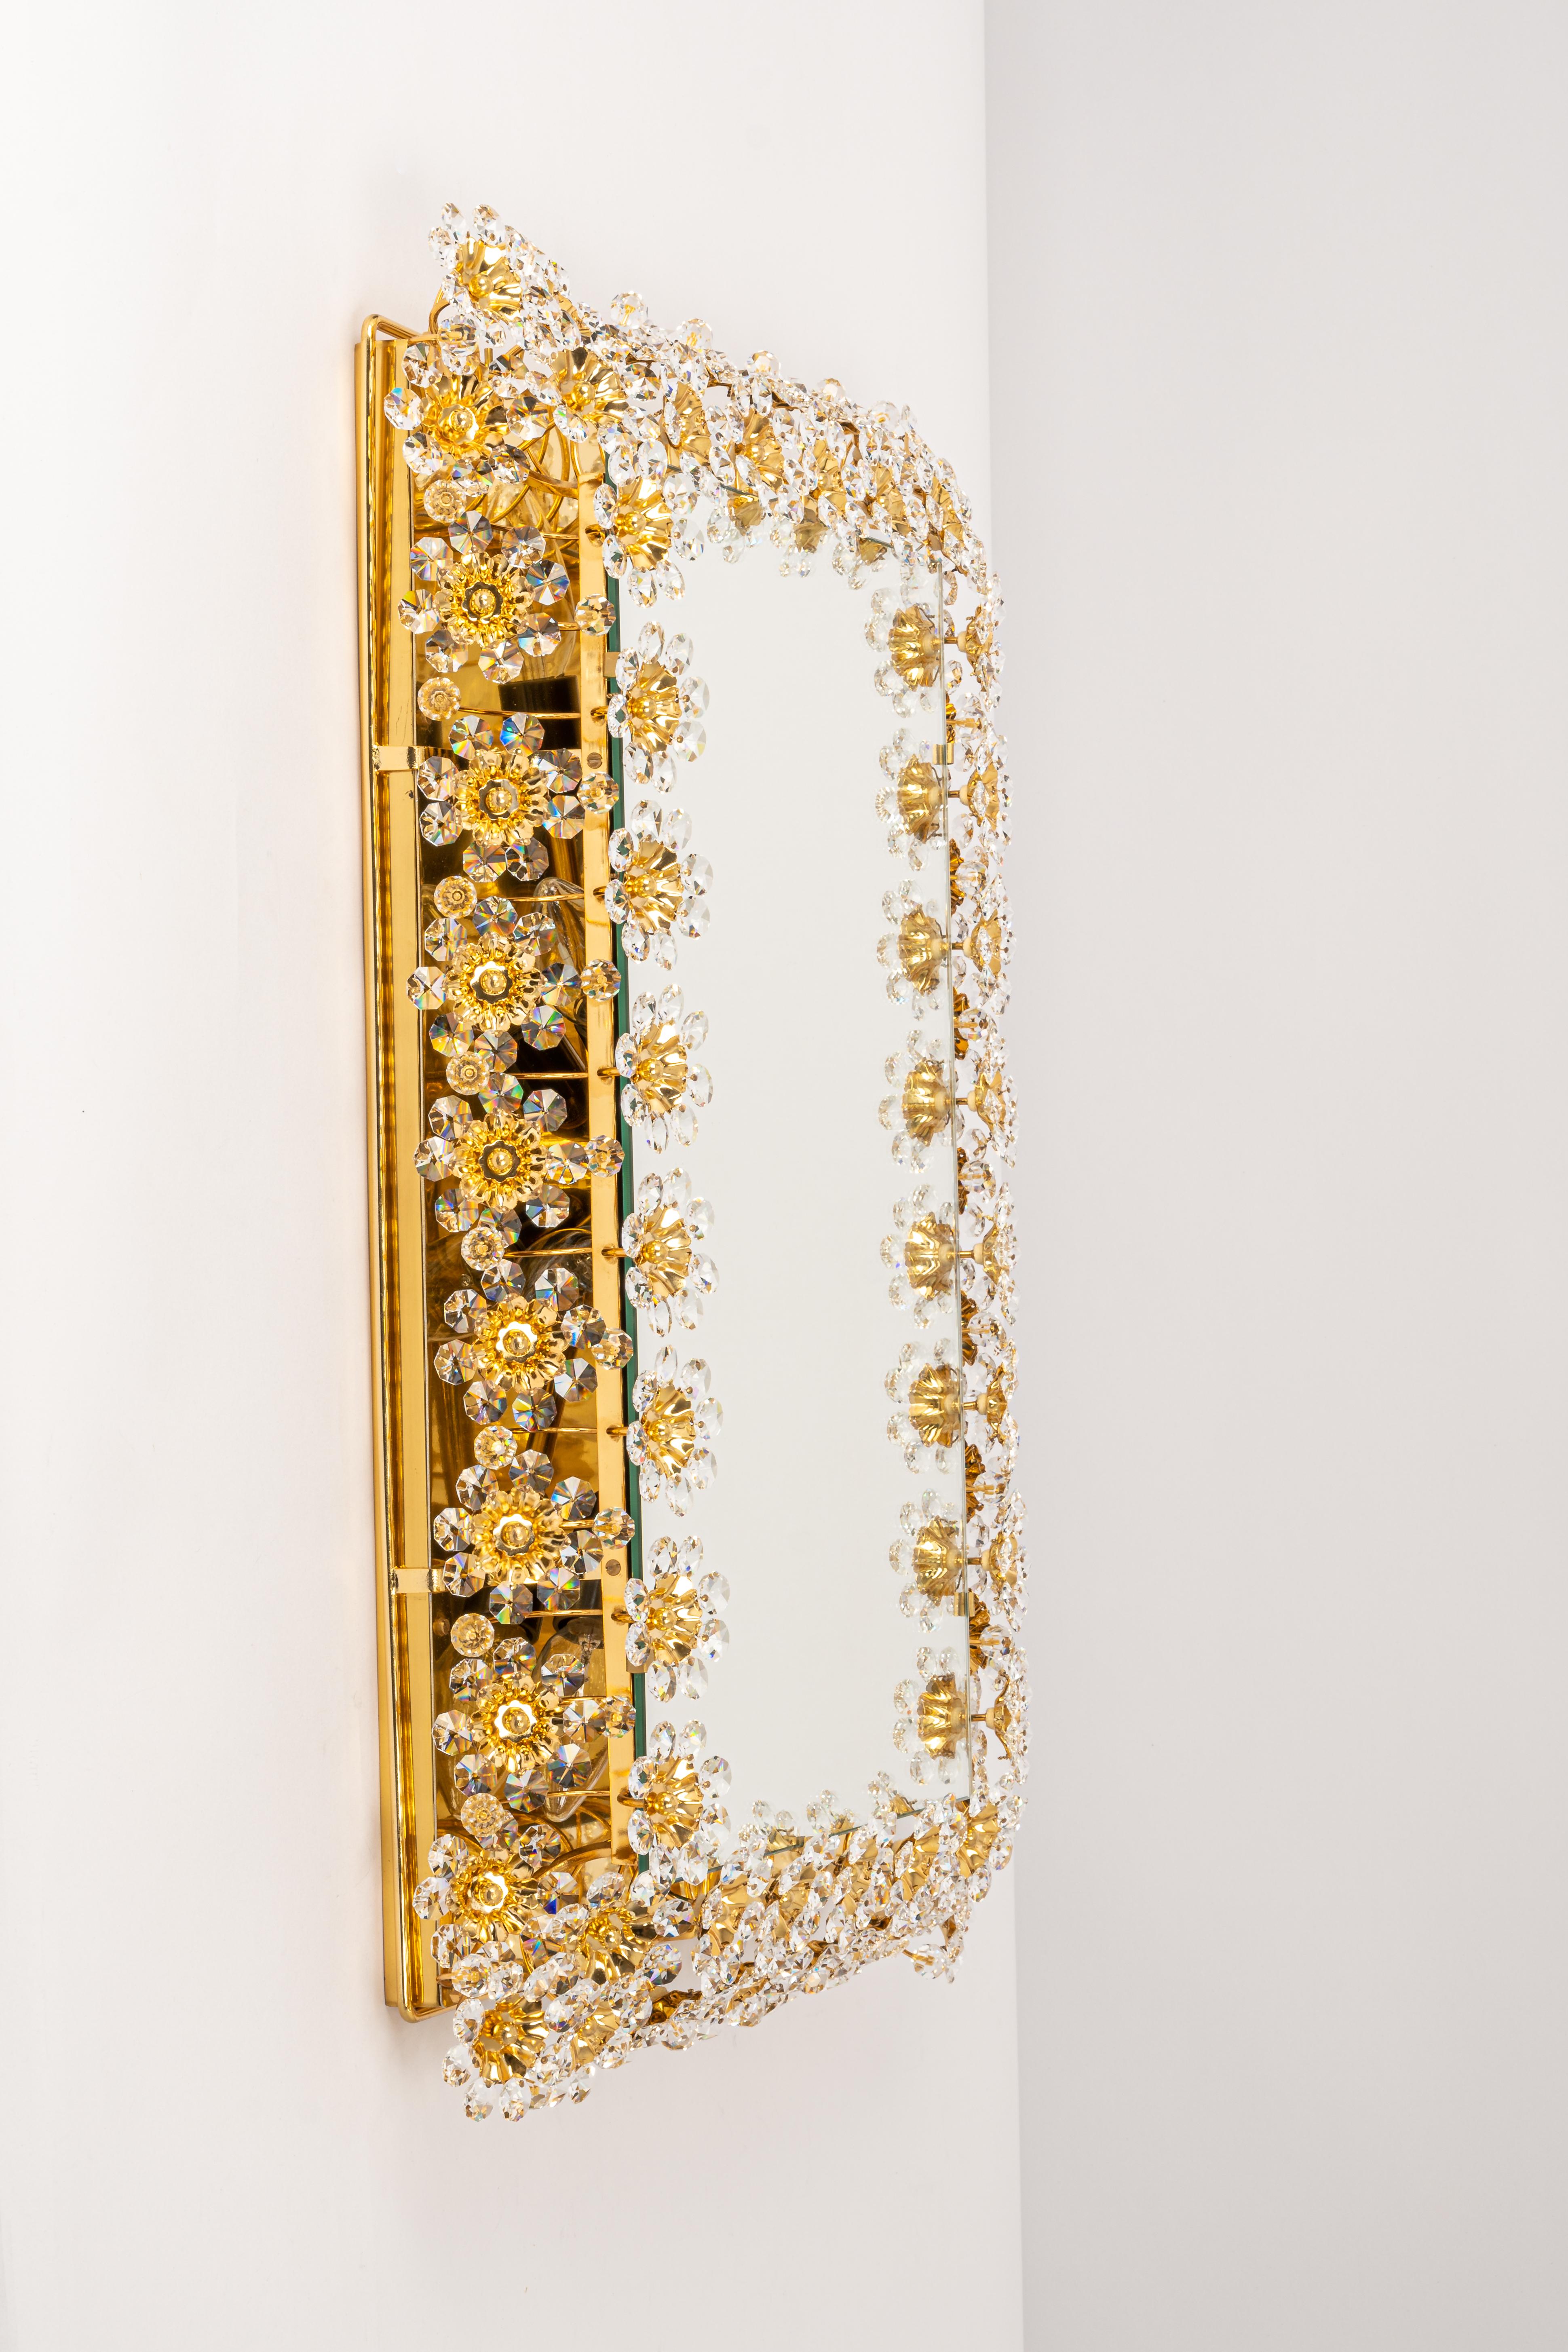 A wonderful and high quality gilded wall mirror by Palwa (Palme & Walter), Germany, 1970s
It is made of a 24-carat gold-plated brass frame decorated with hundreds of cut crystal glass. 

High quality and in very good condition. Cleaned,